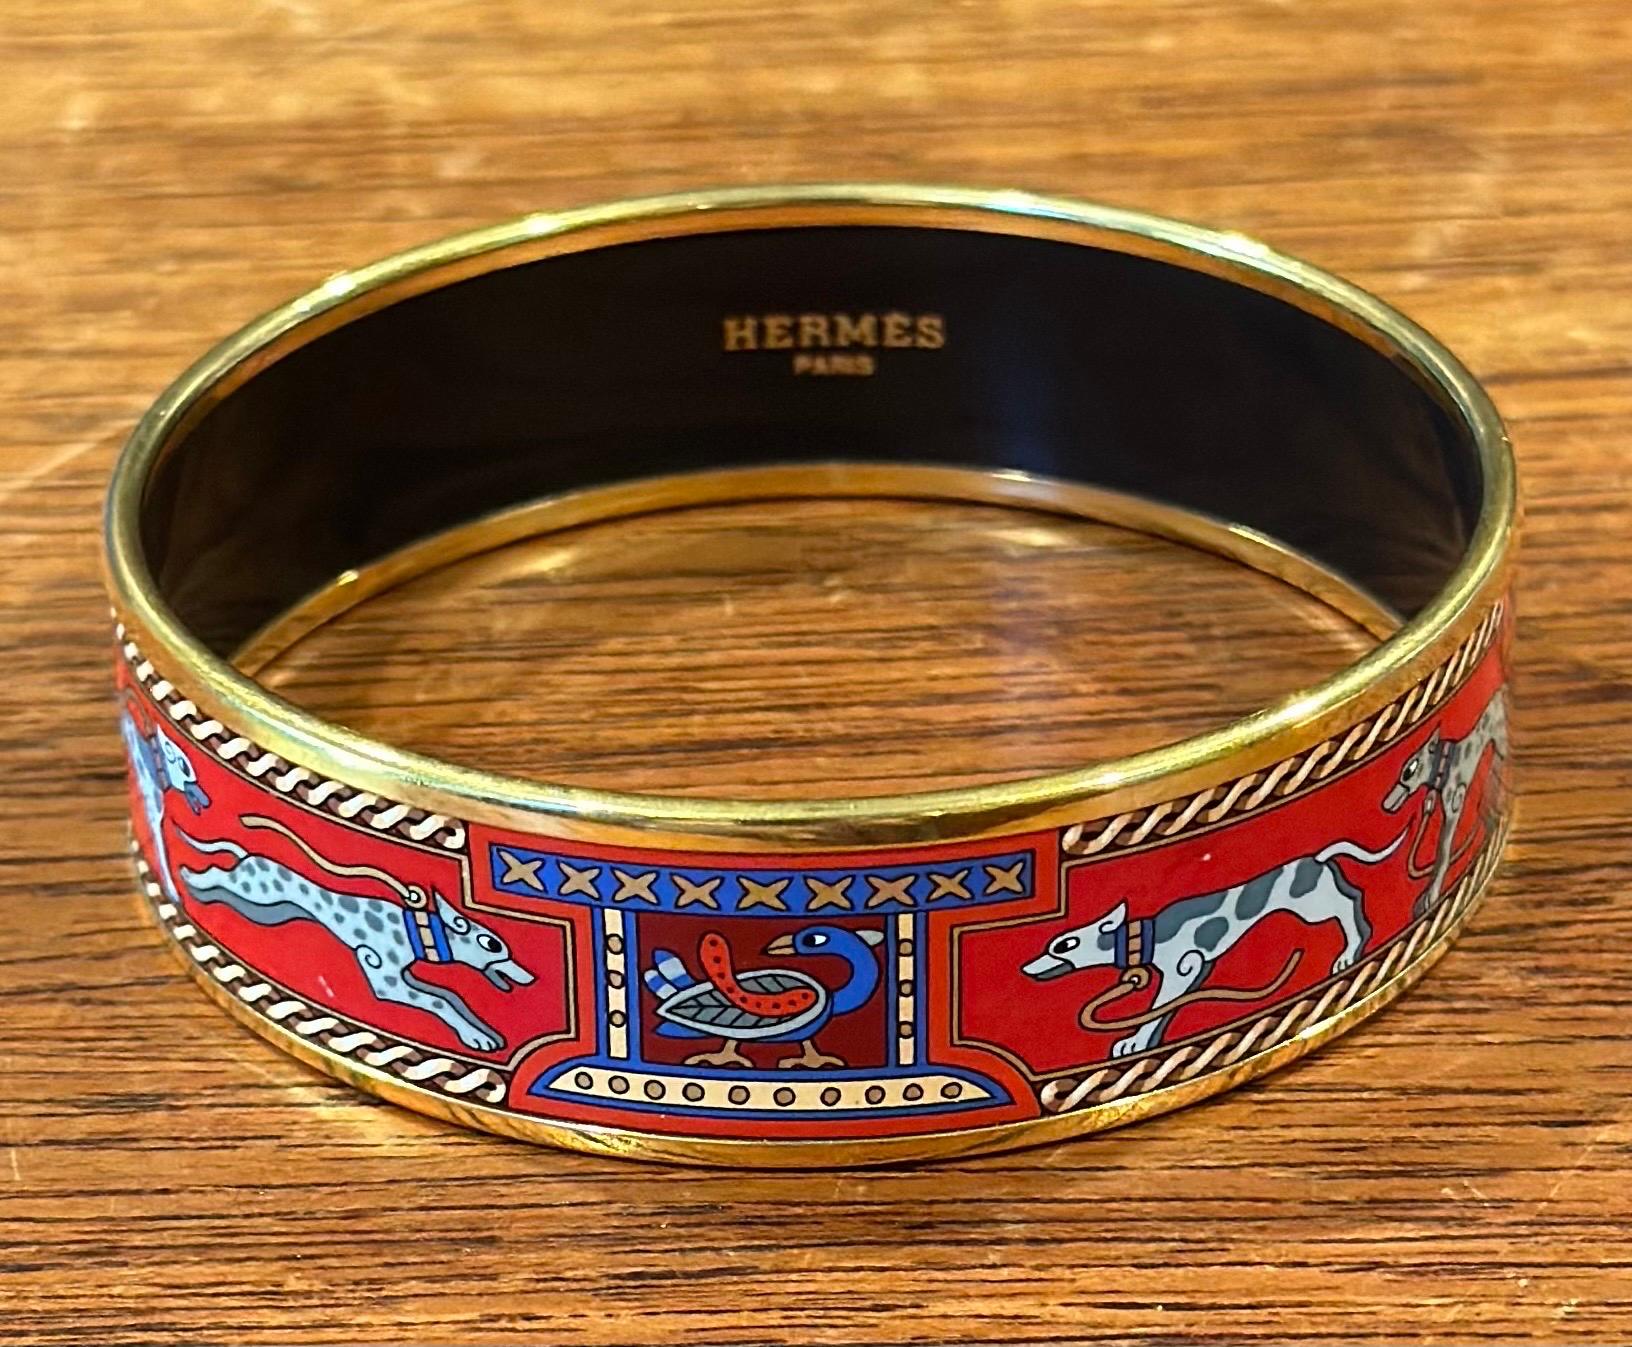 20th Century Vintage Enameled Greyhound Bangle Bracelet with Box by Hermès 70mm For Sale